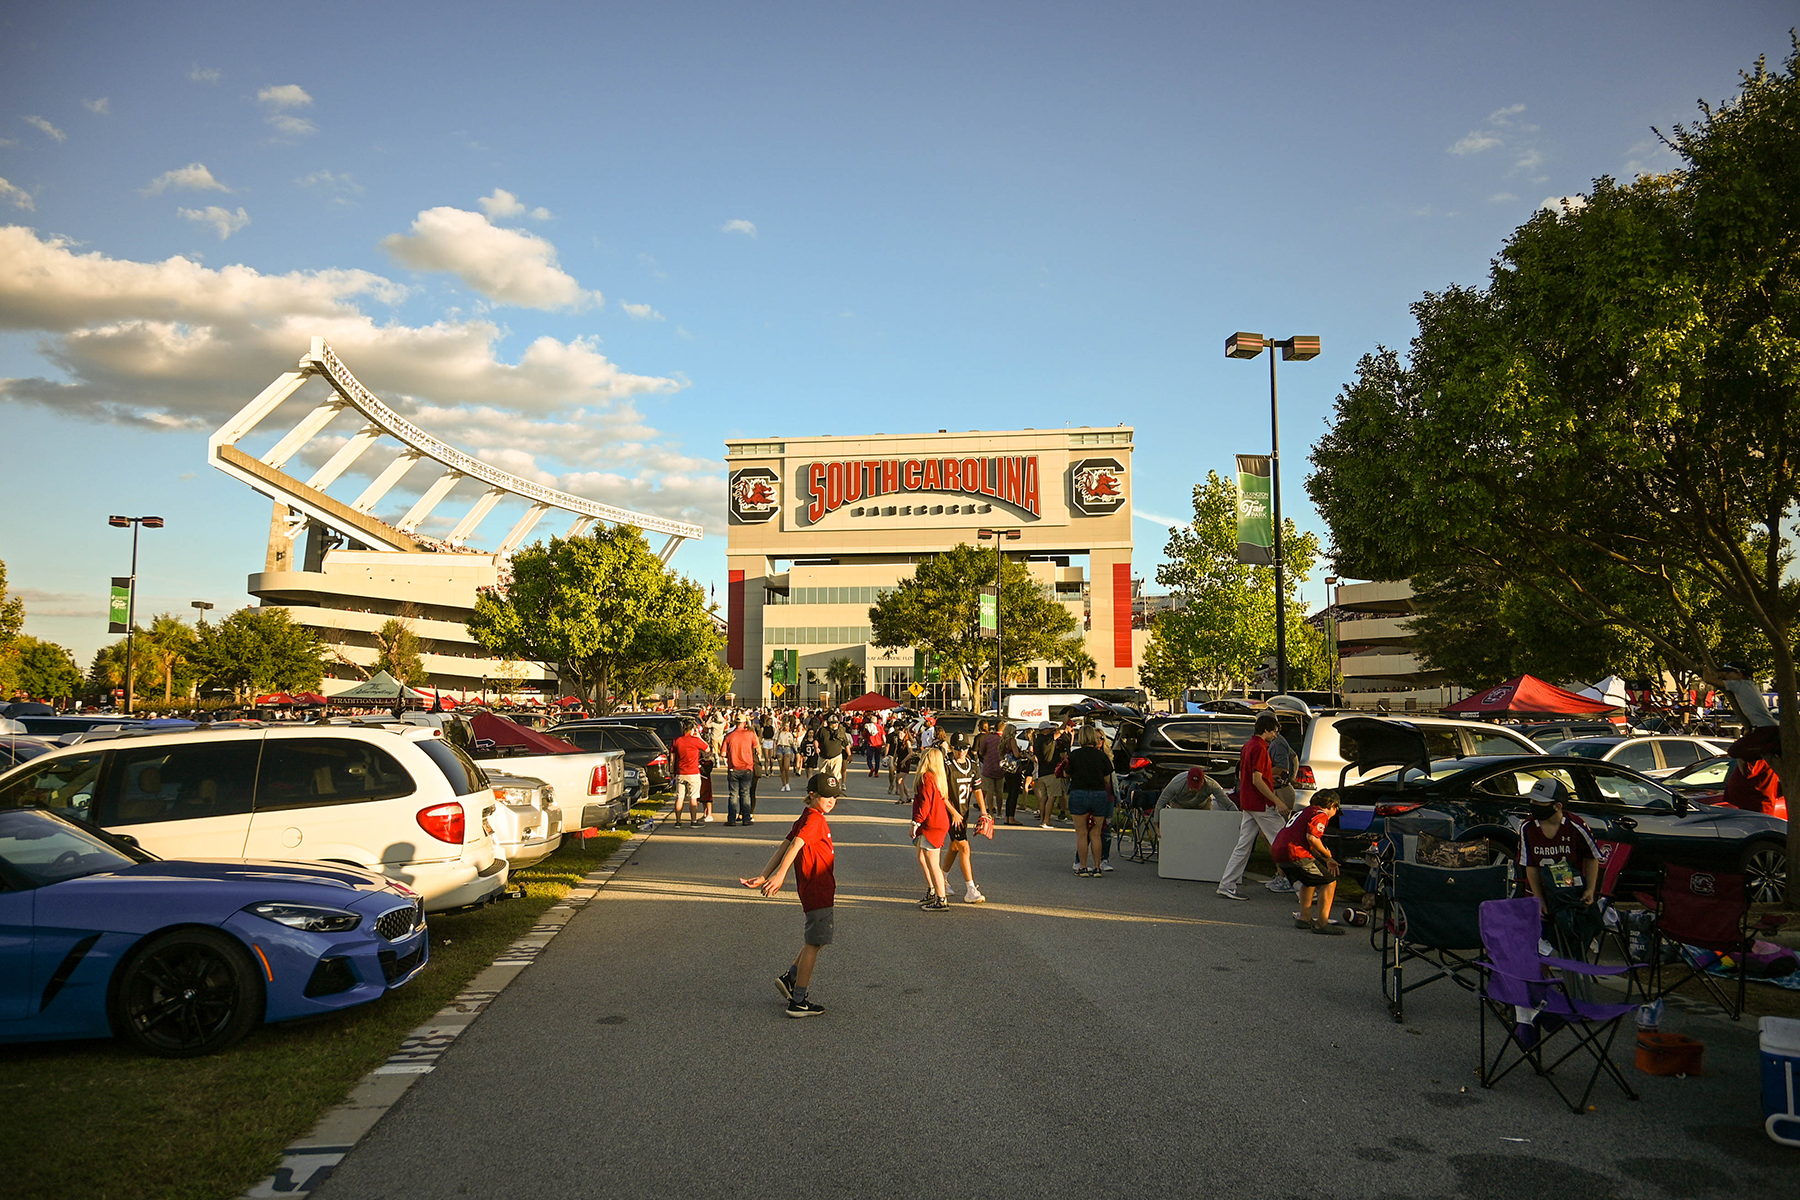 Parking Information Announced for October 22 State Fair Game